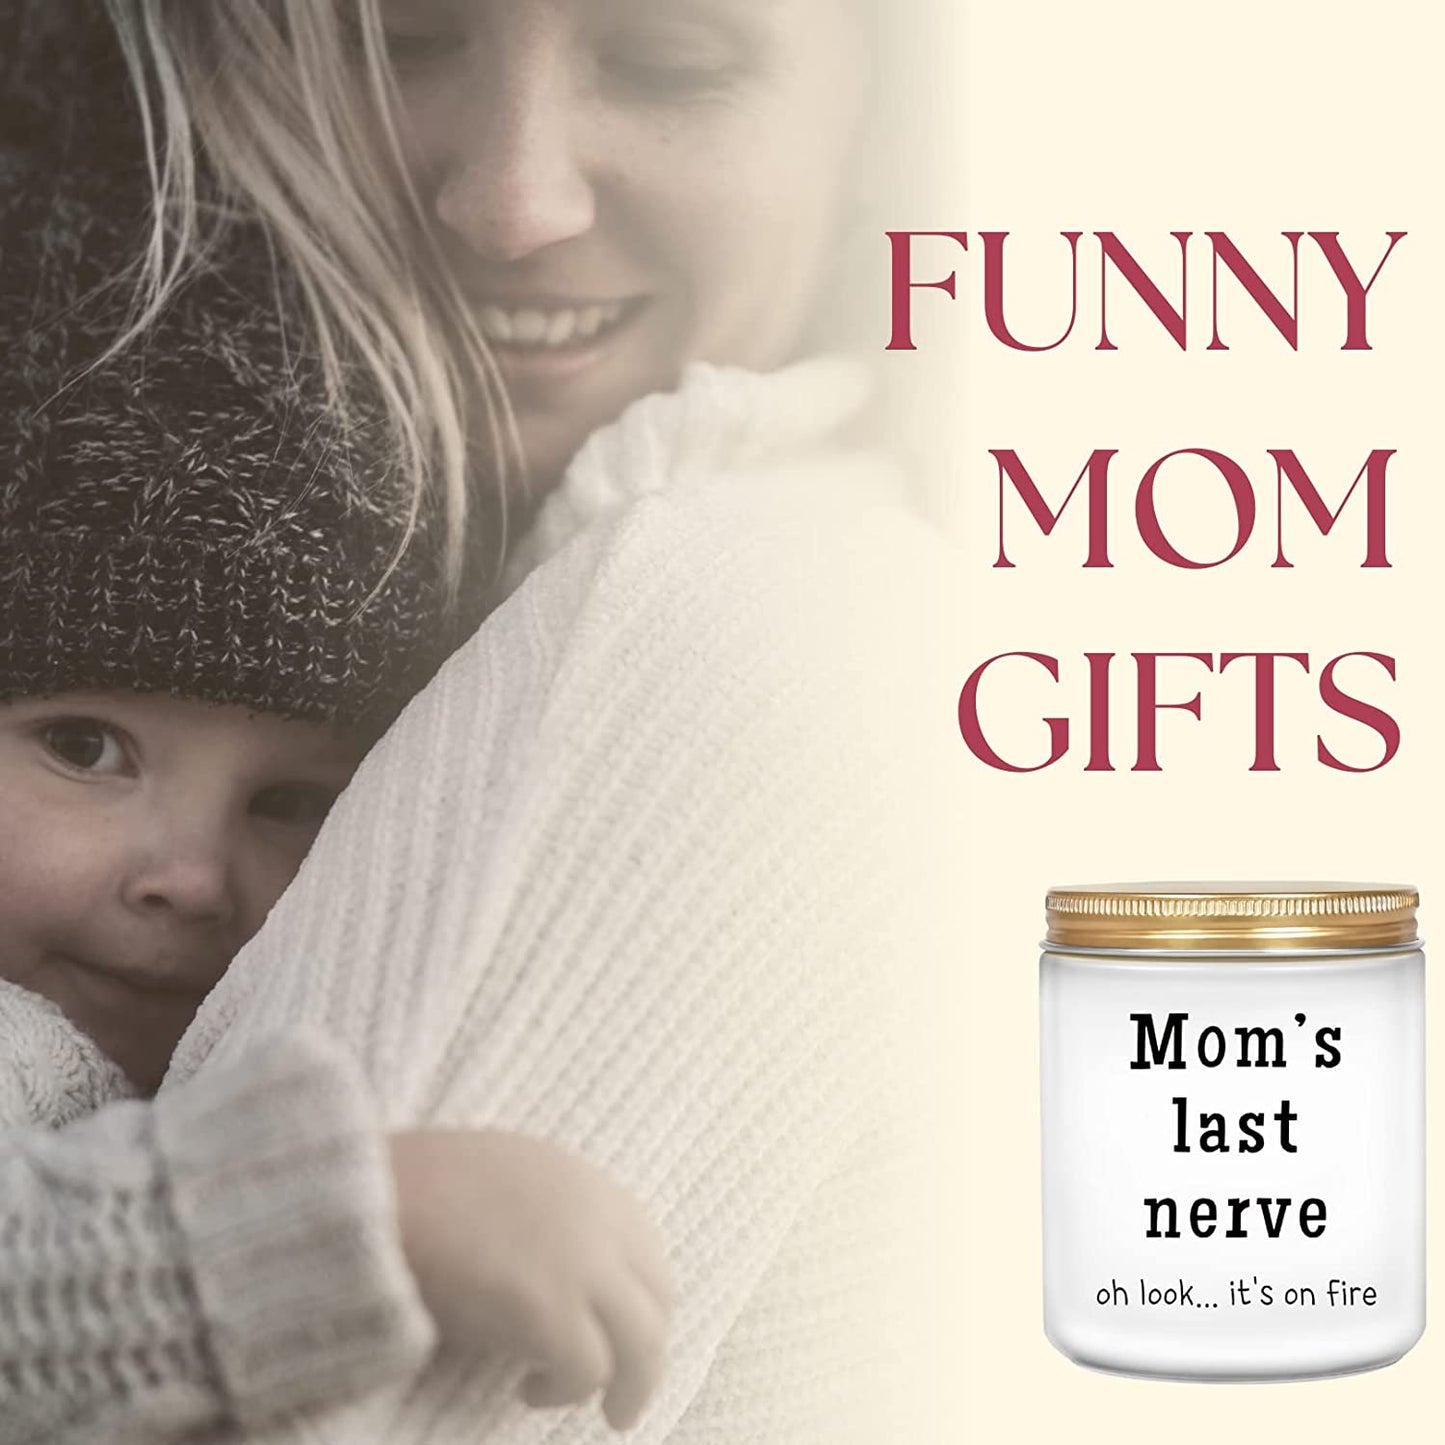 Funny Mom Gifts, Gifts for Mom from Daughter Son, Moms Last Nerve, Funny  Jar Candle, Funny Mother's Day Gifts, Moms Birthday Gift, Gag Gift for Mom,  Personalized Gift, Happy Mothers Day Candle